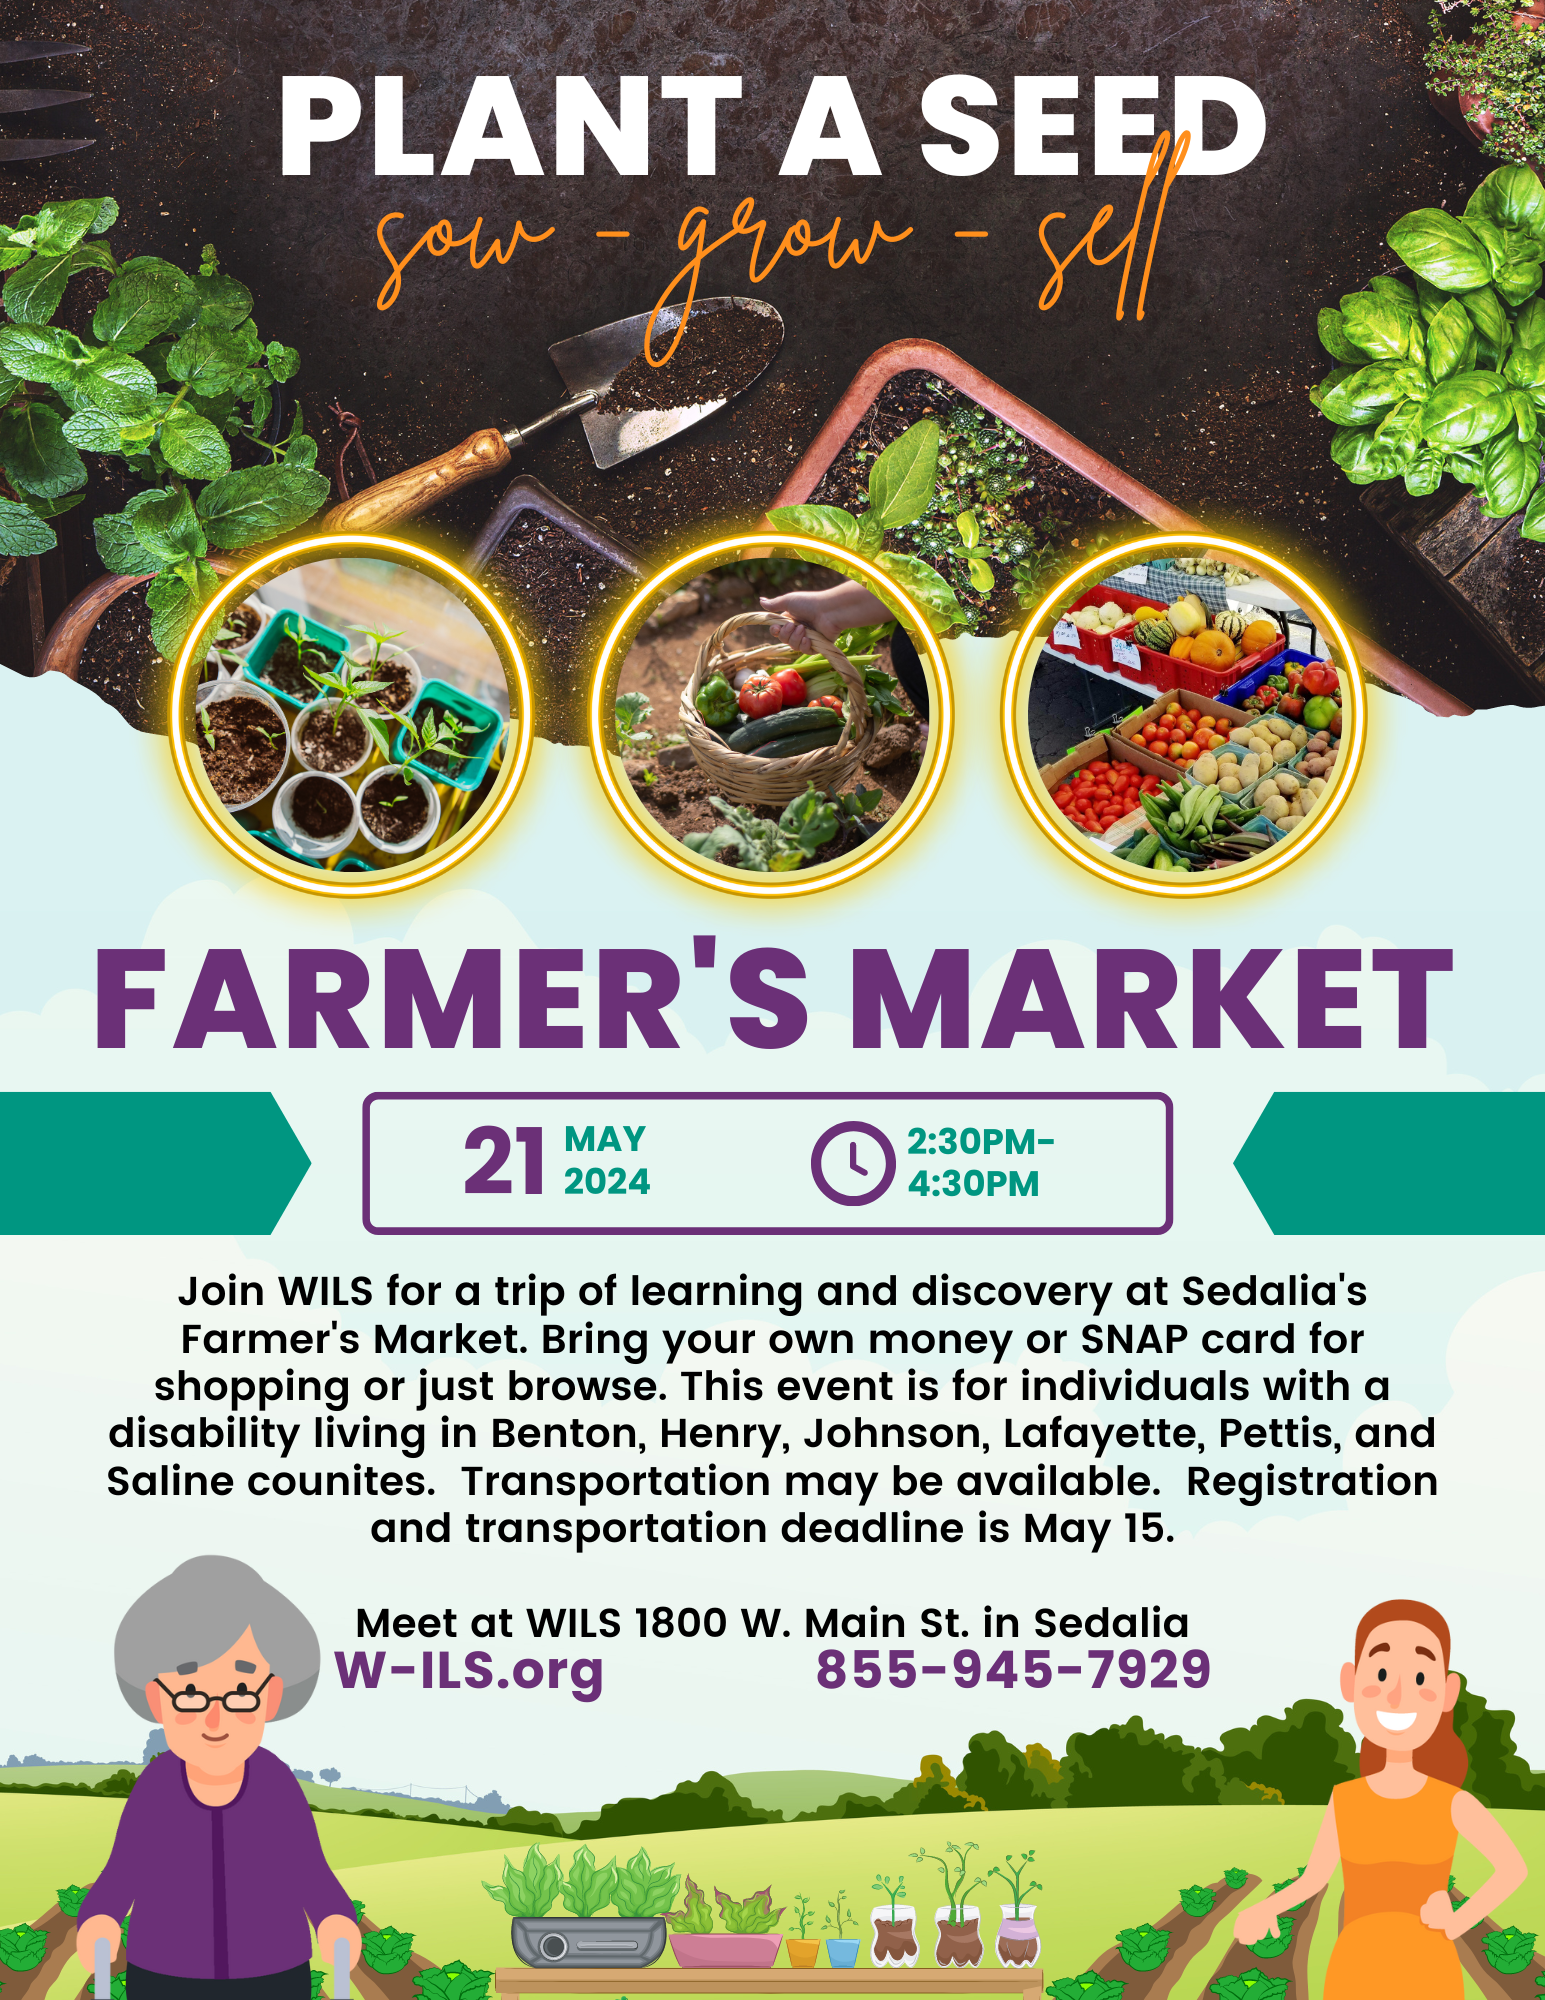 Join WILS for a trip of learning and discovery at Sedalia's Farmer's Market on May 21 from 2:30pm - 4:30pm. Bring your own money or SNAP card for shopping or just browse. This event is for individuals with a disability living in Benton, Henry, Johnson, Lafayette, Pettis, and Saline counites. Transportation may be available. Registration and transportation deadline is May 15. Meet at WILS 1800 W. Main St. in Sedalia Farmer's Market